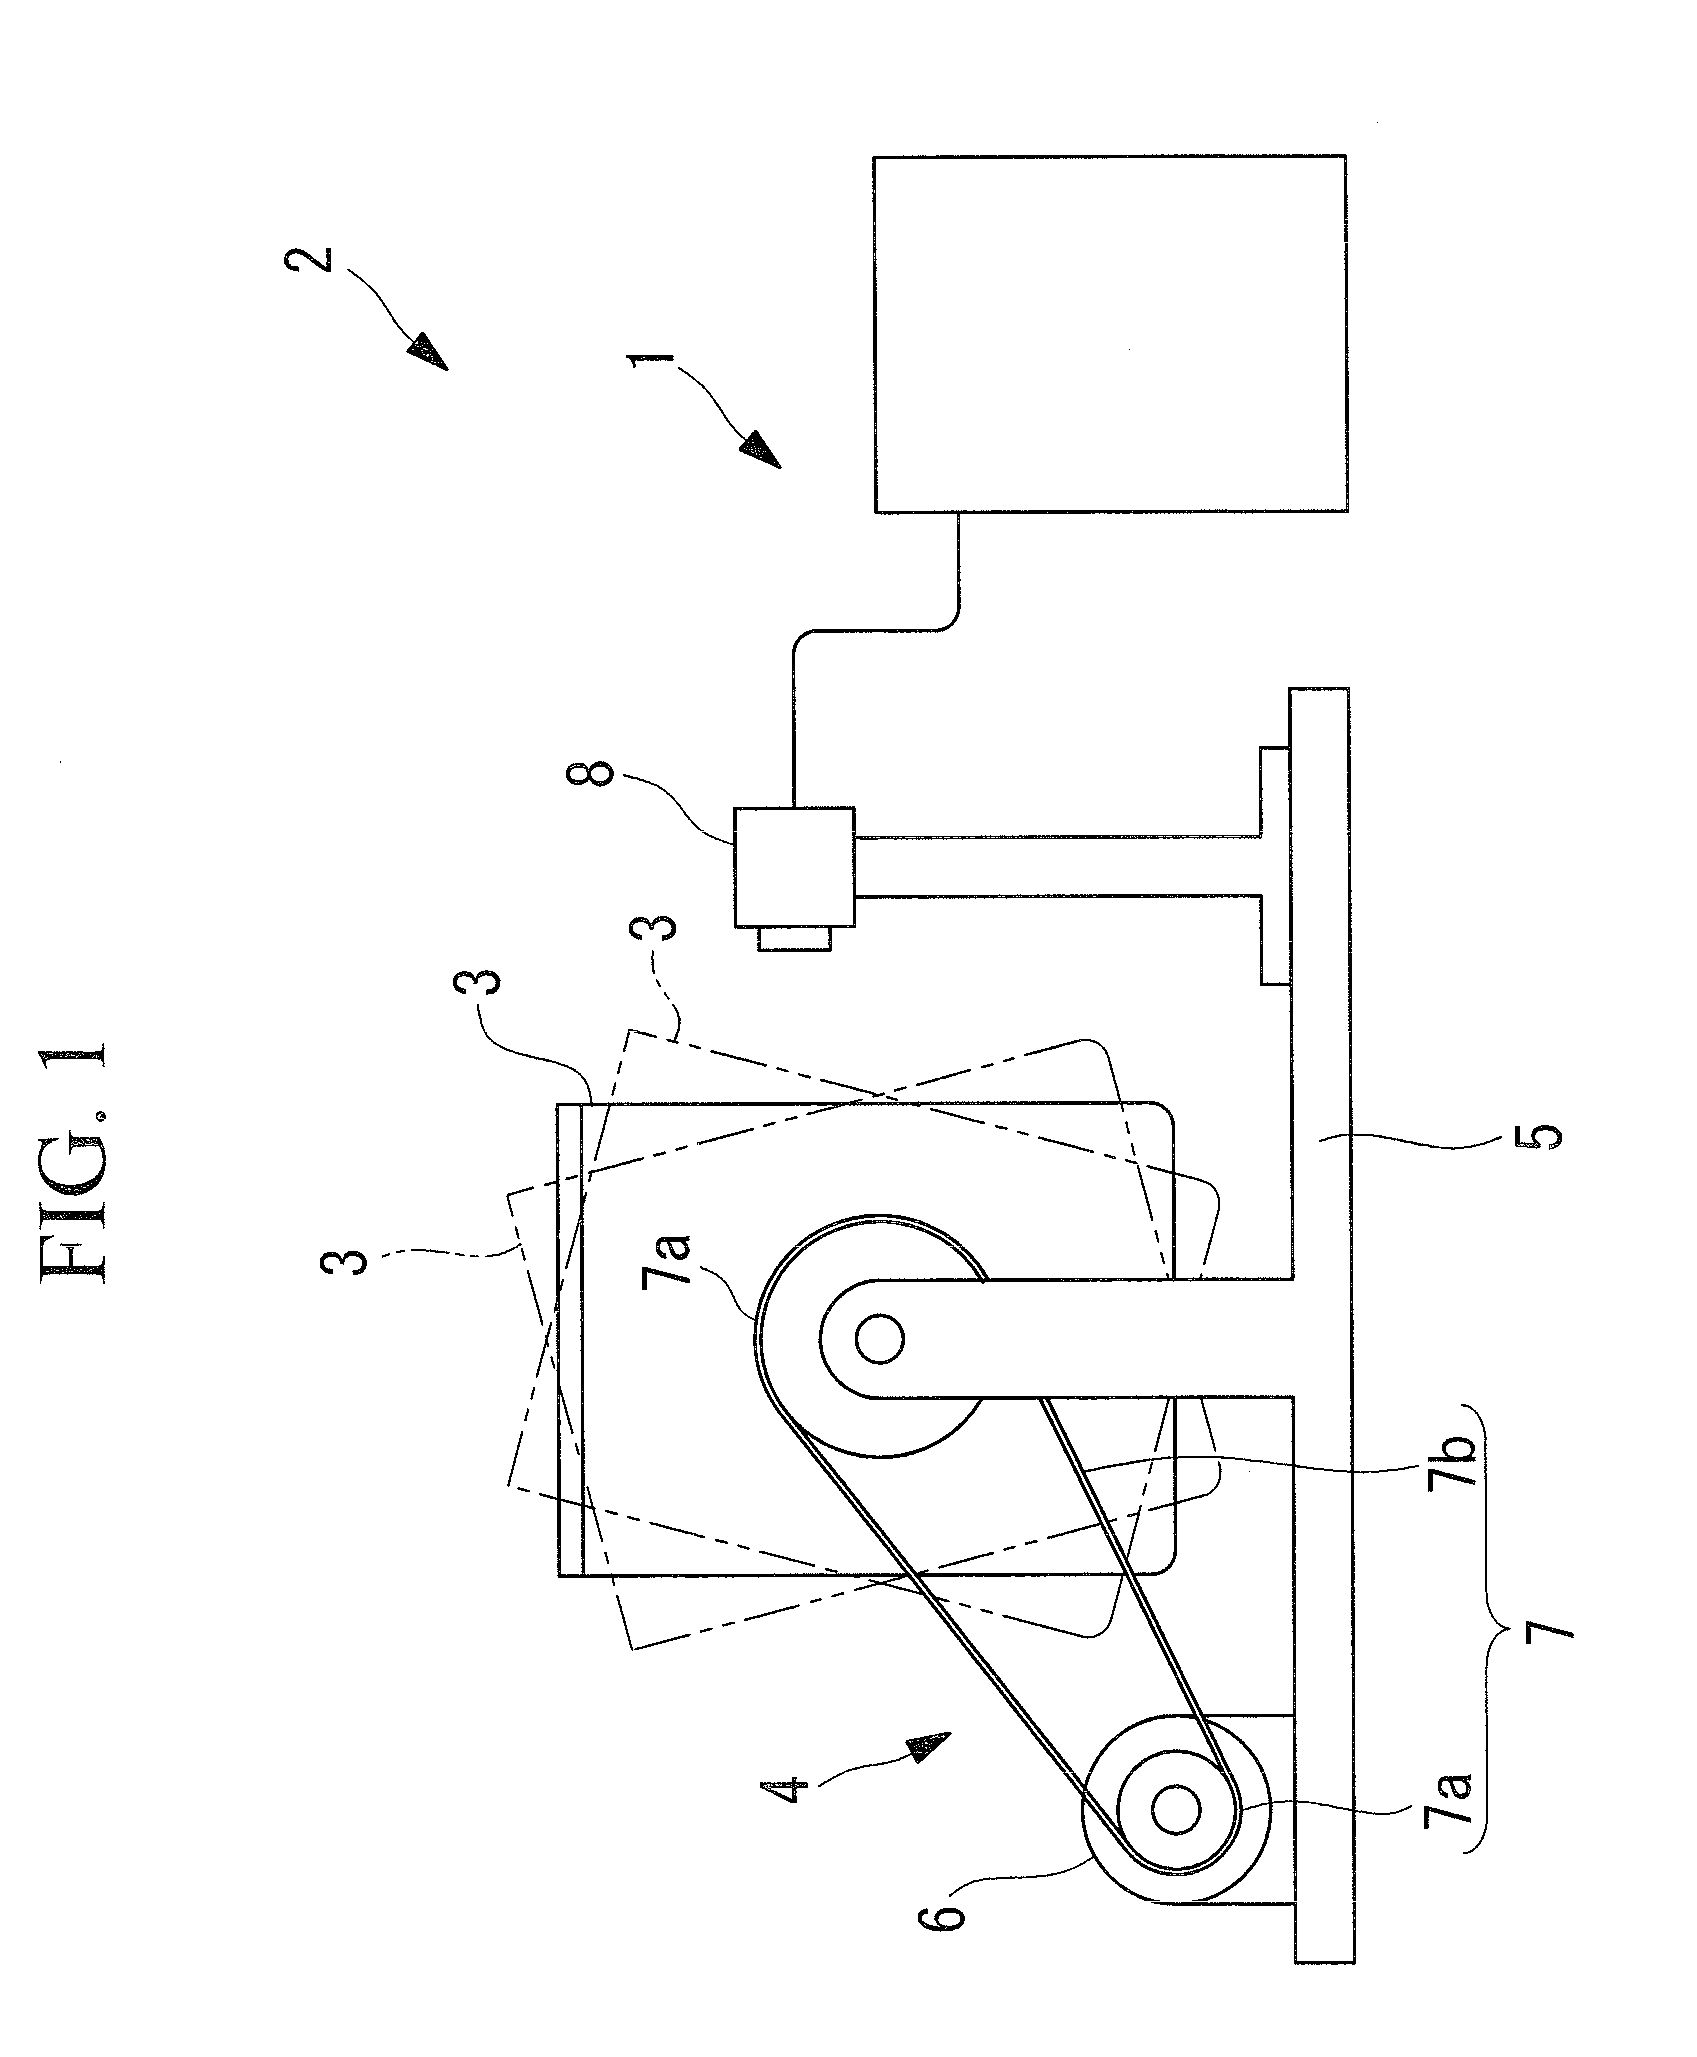 Apparatus for determining the termination of fat digestion and fat tissue digestion apparatus